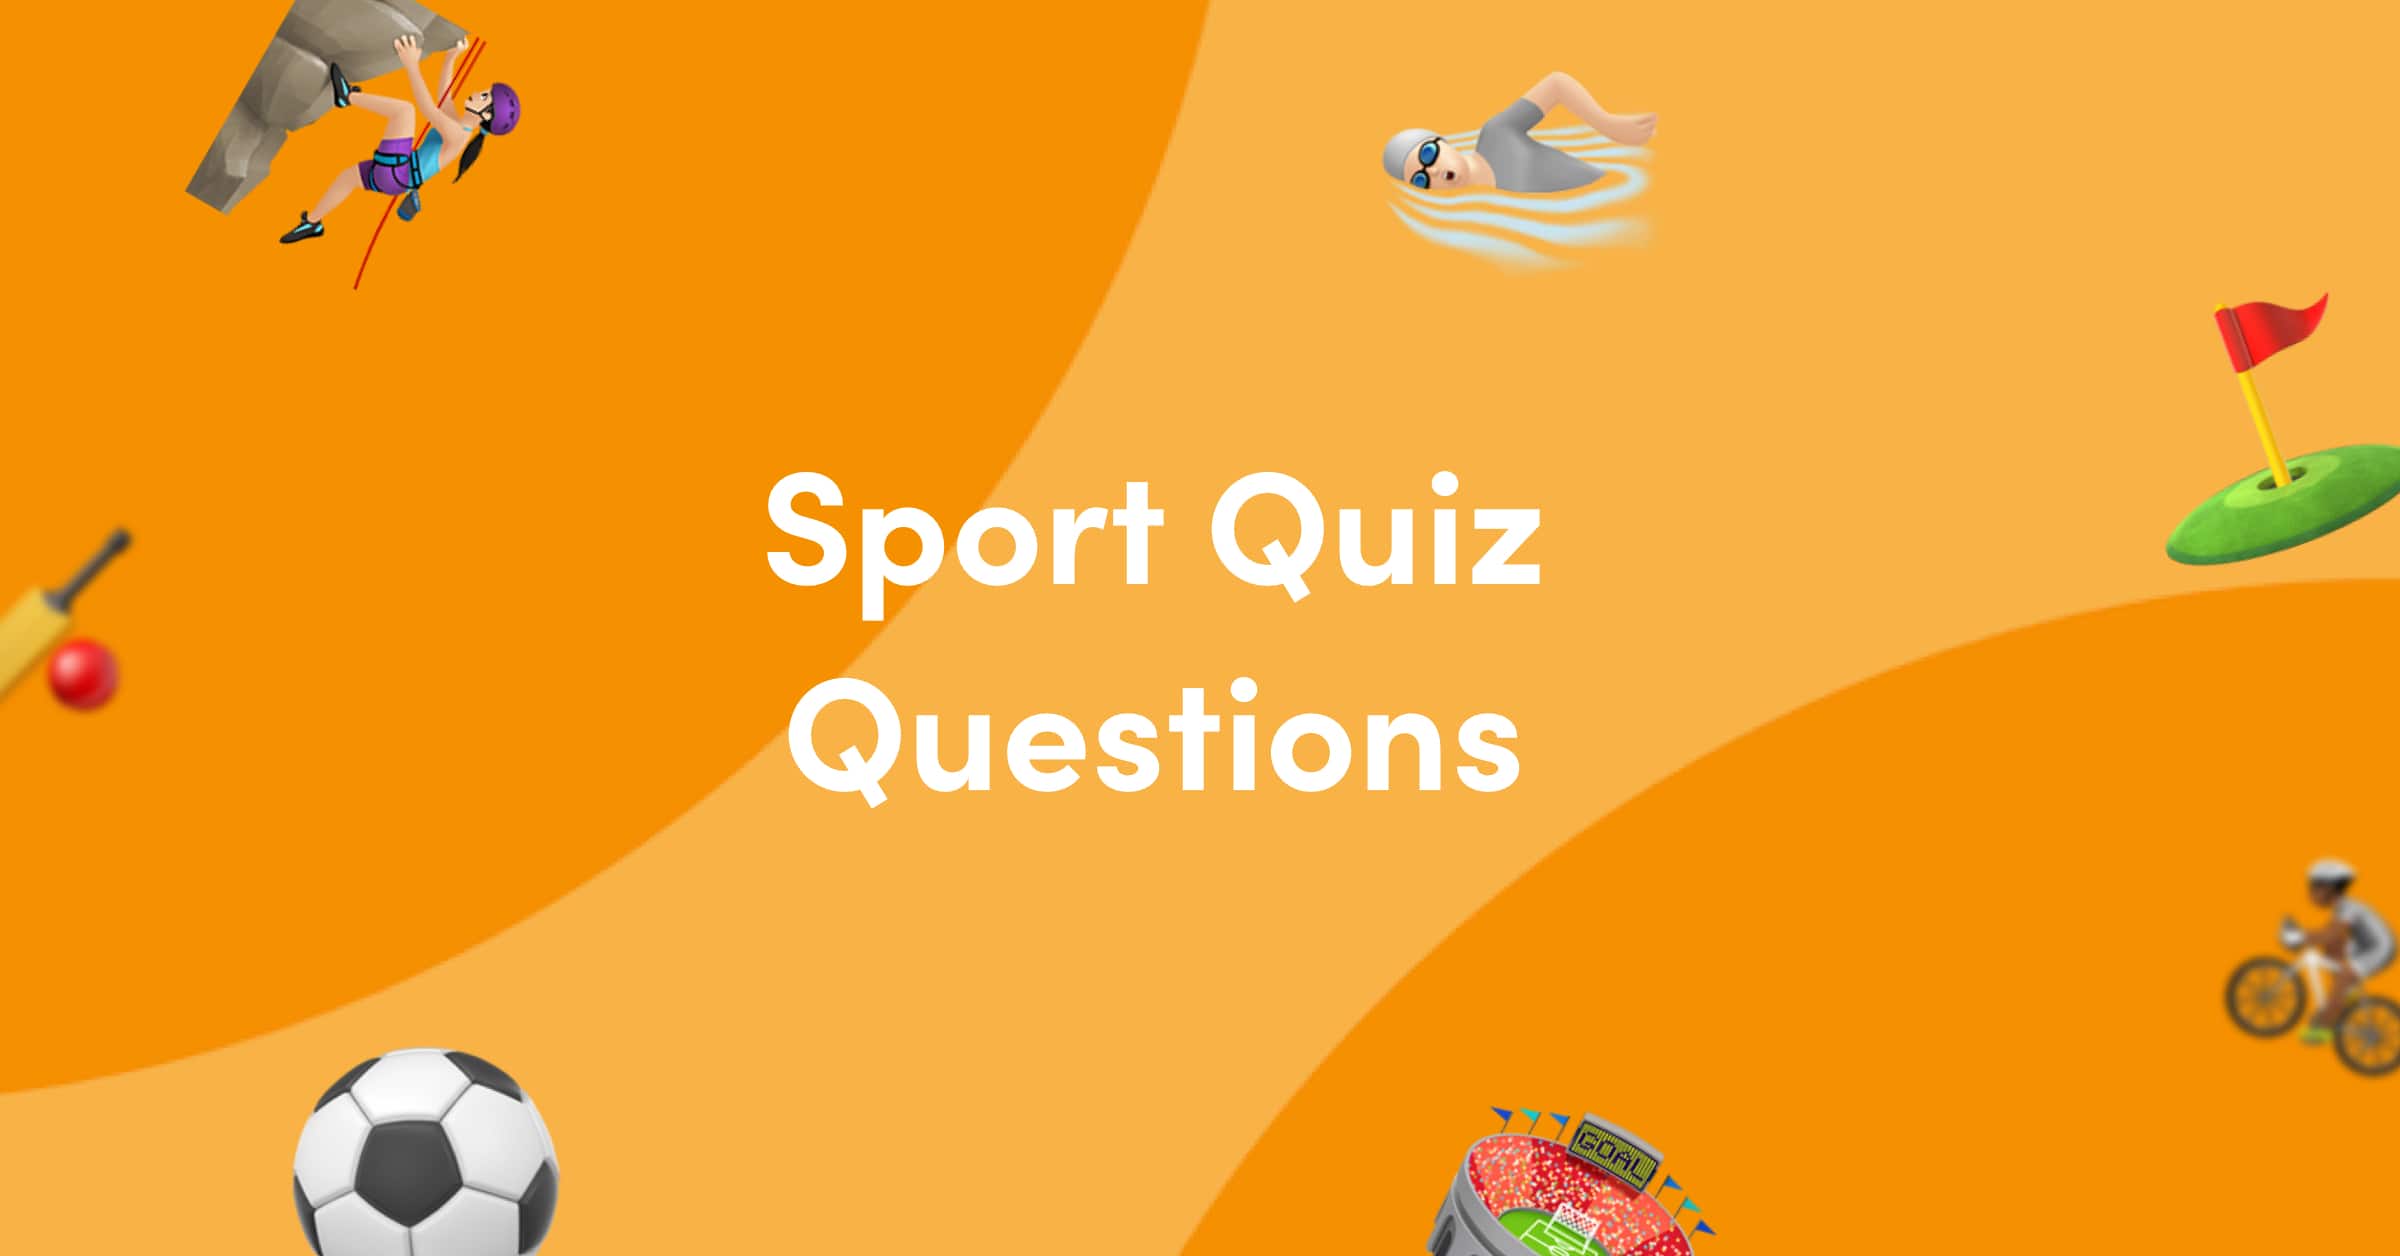 Emojis on orange background for sport quiz questions and answers